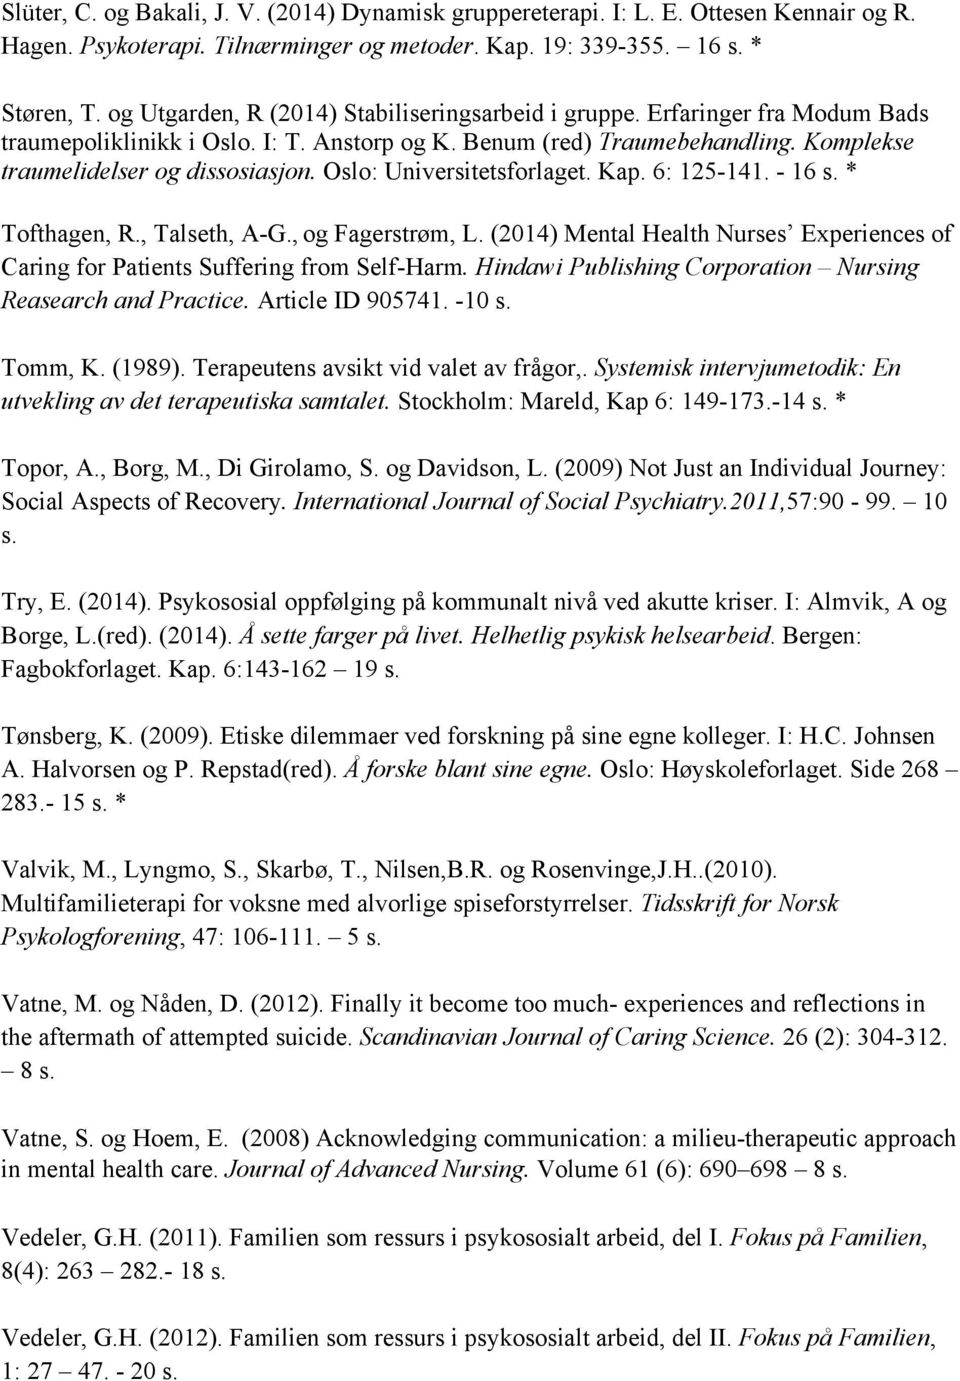 Oslo: Universitetsforlaget. Kap. 6: 125-141. - 16 s. * Tofthagen, R., Talseth, A-G., og Fagerstrøm, L. (2014) Mental Health Nurses Experiences of Caring for Patients Suffering from Self-Harm.